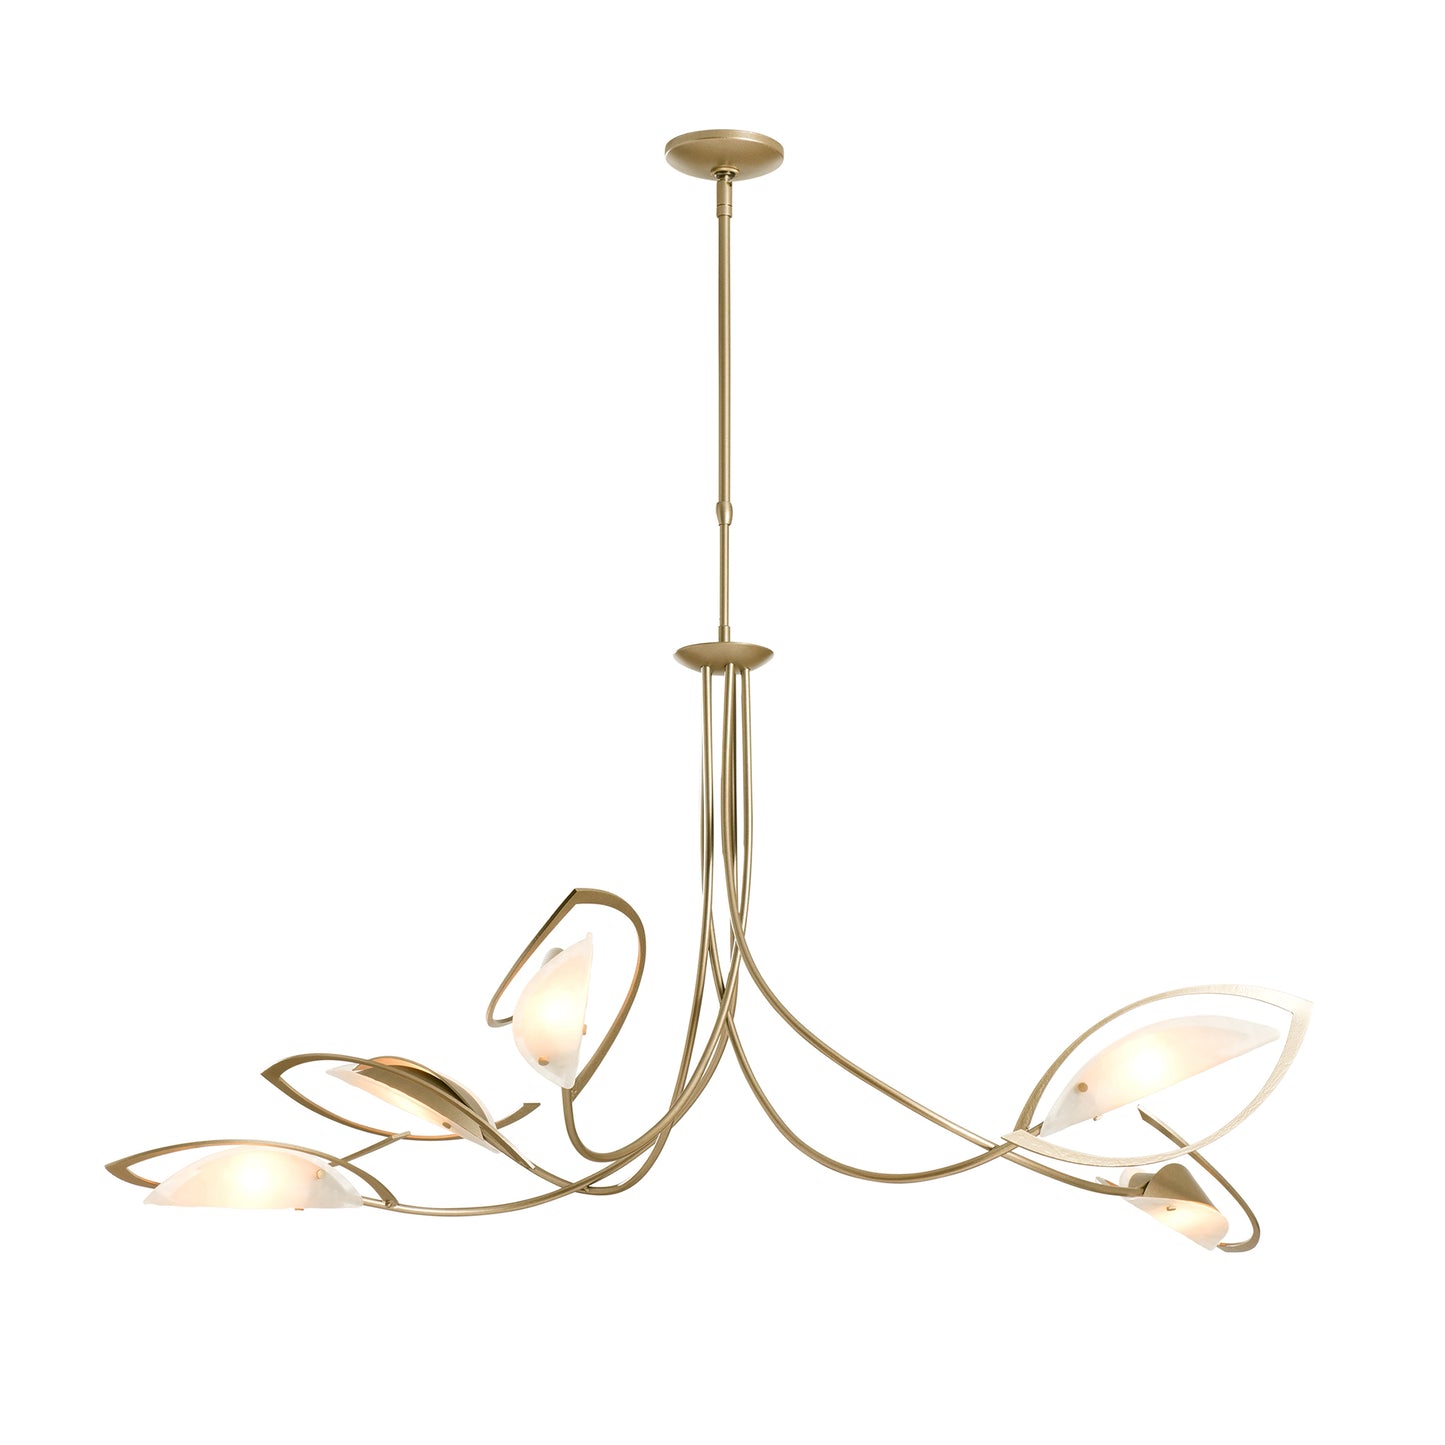 The Hubbardton Forge Aerial Pendant lighting fixture showcases a stunning gold leaf design.
Revised Sentence: The Hubbardton Forge Aerial Pendant lighting fixture showcases a stunning gold leaf design.